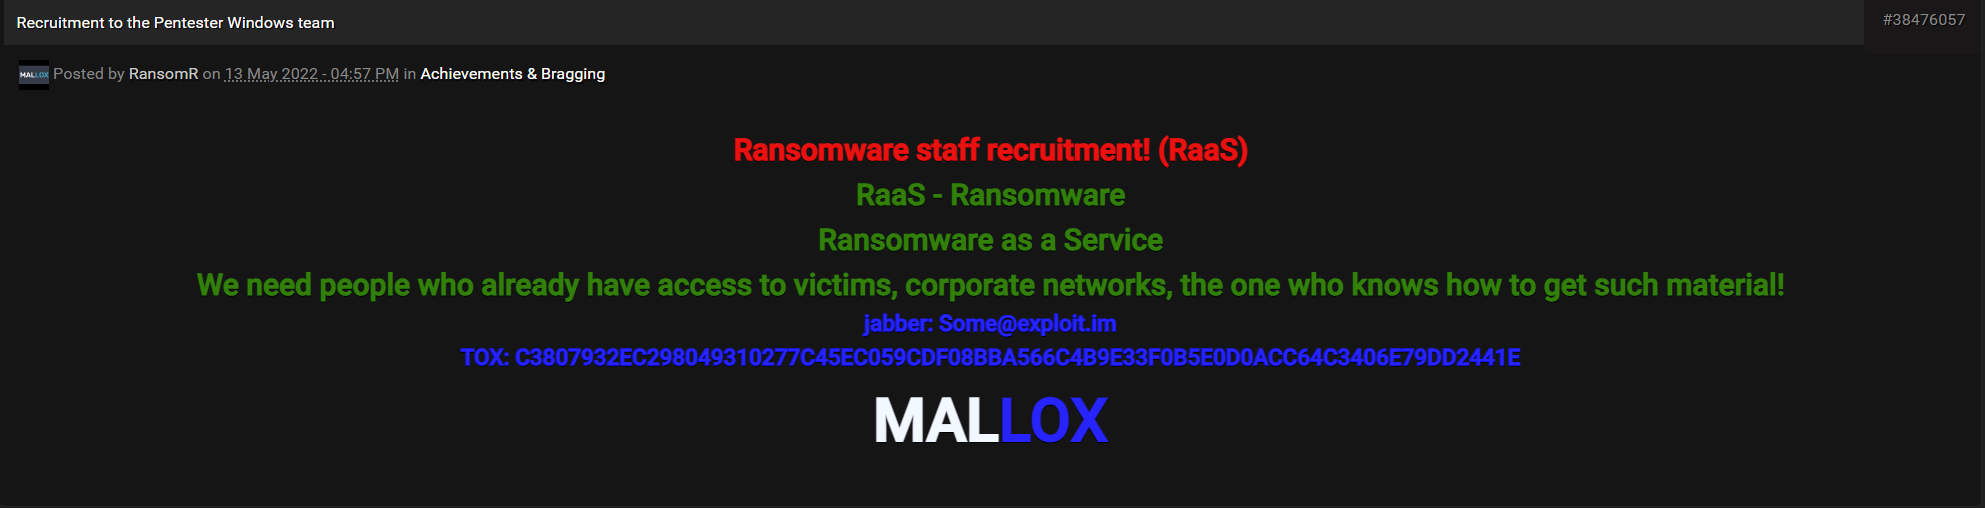 Image 12 is a screenshot of RansomR’s post on the hacking forum Nulled. It was posted in March 2022 and says Ransomware staff recruitment. RaaS - Ransomware. Ransomware as a service. We need people who already have access to victims, corporate networks, the one who knows how to get such material! Then it lets contact information for Jabber and TOX as well as MALLOX in all caps at the bottom.